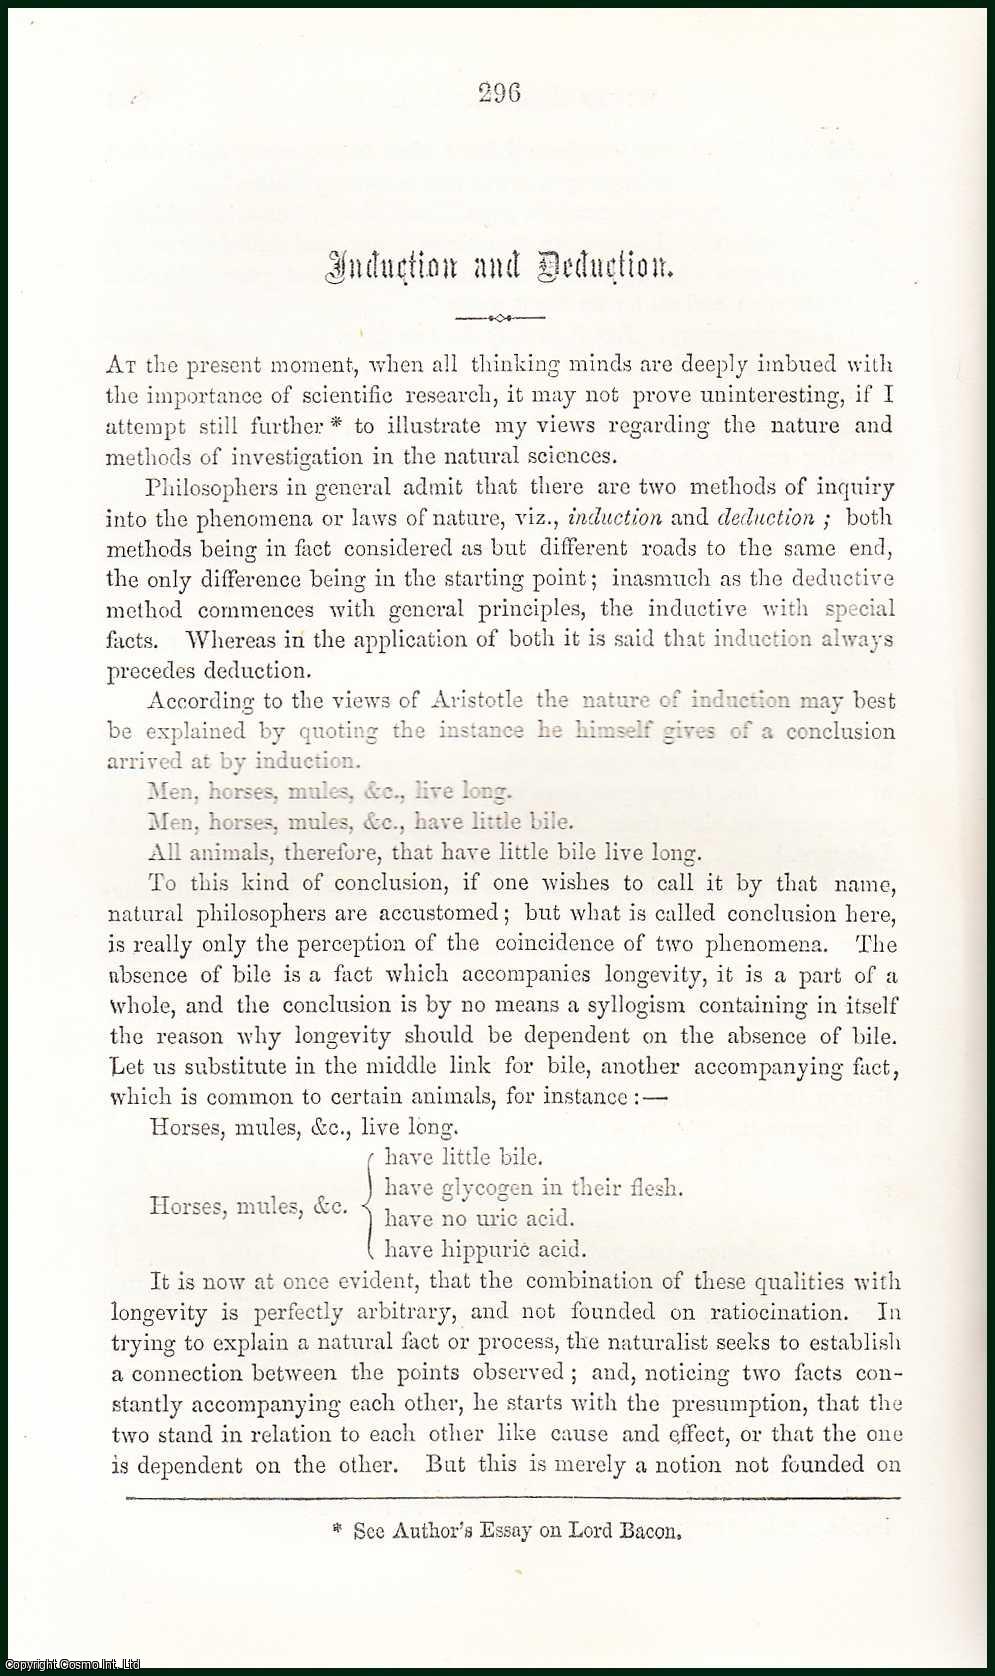 Justus Von Liebig - Induction and Deduction : Philosophers in general admit there are two methods of inquiry into the phenomena or laws of nature. An uncommon original article from the Cornhill Magazine, 1865.